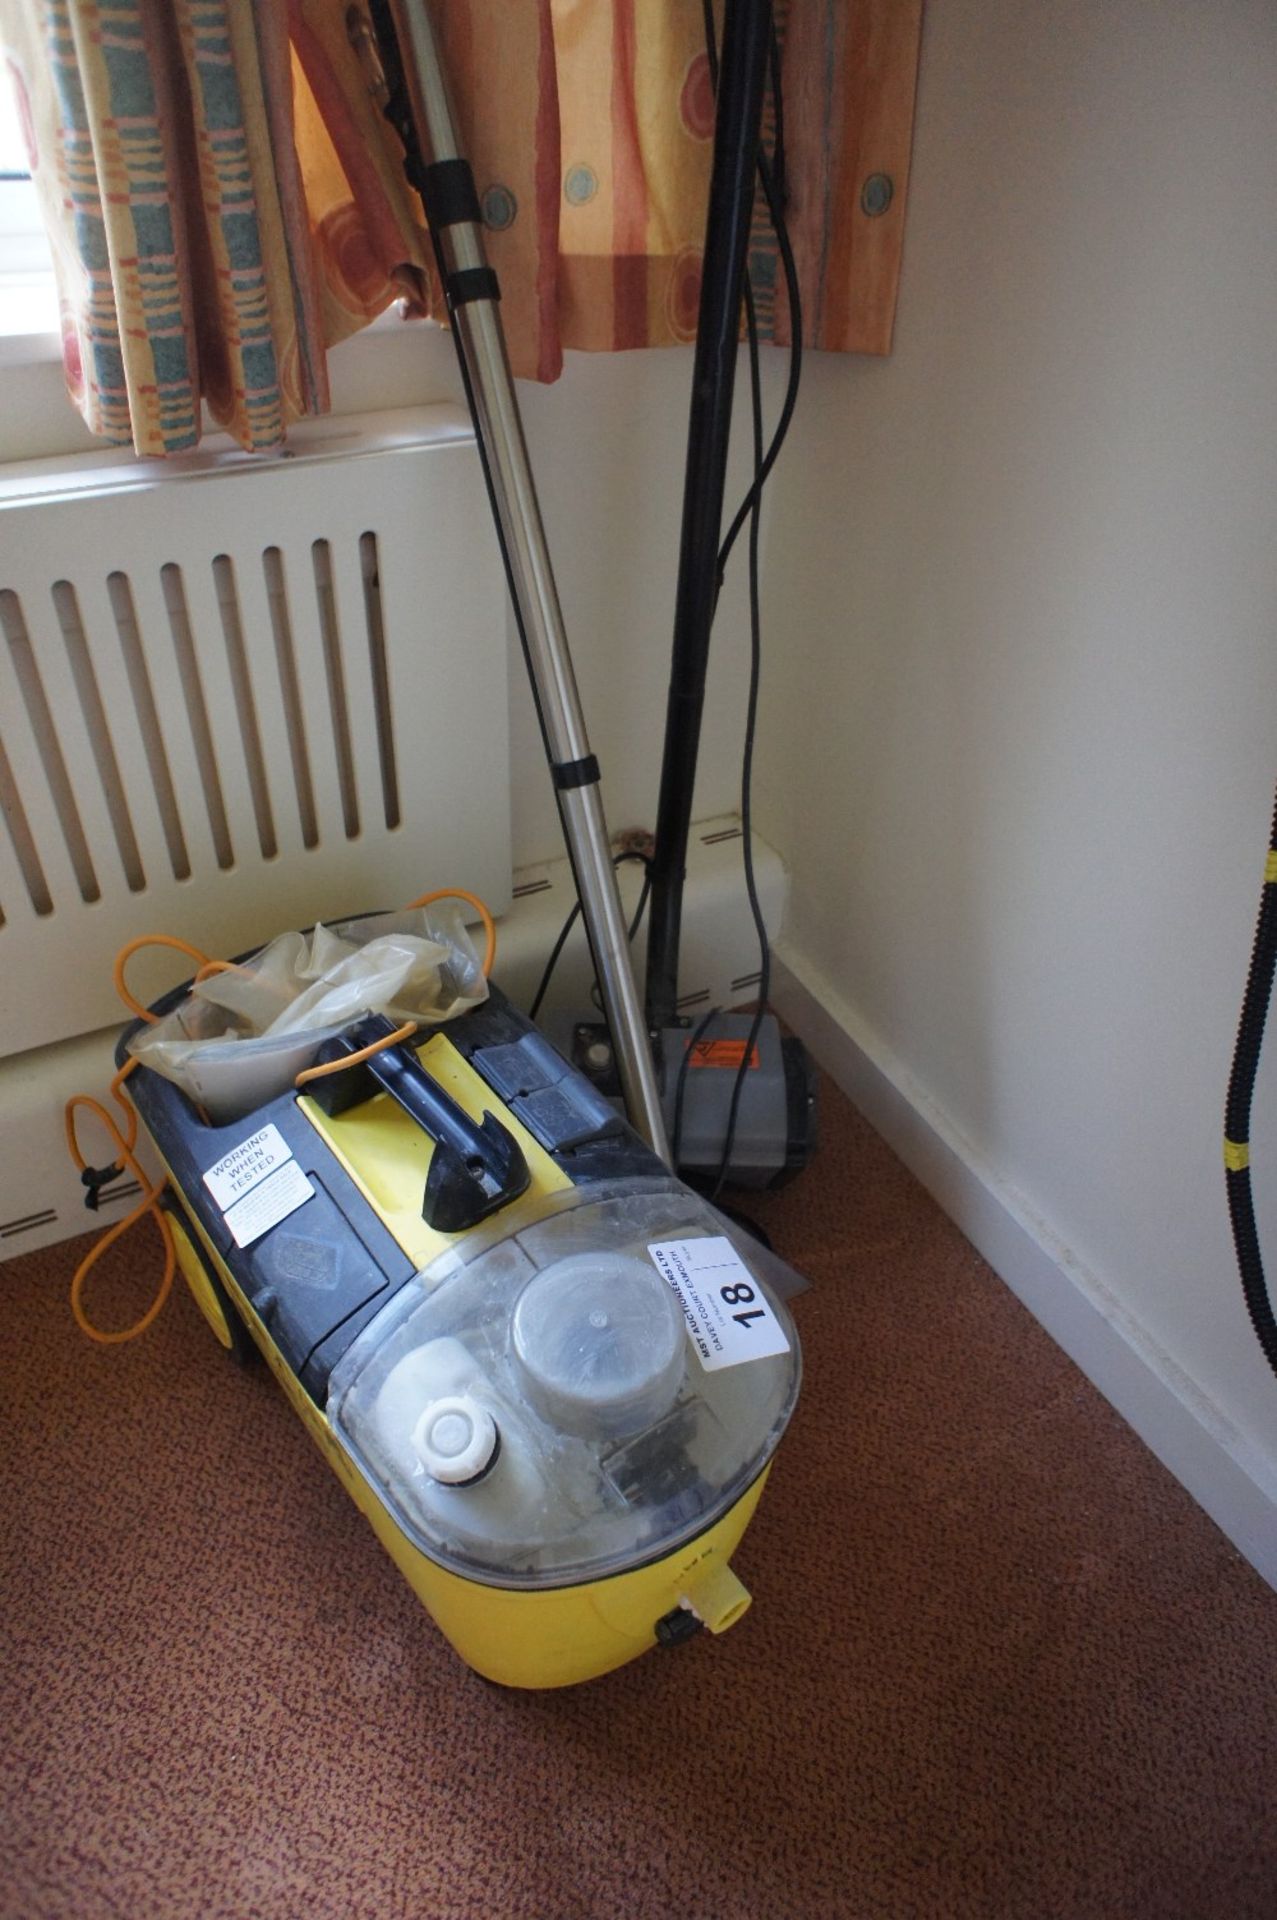 NB: this is a carpet cleaner not a steam cleaner... 1 Karcher puzzi 200 carpet cleaner